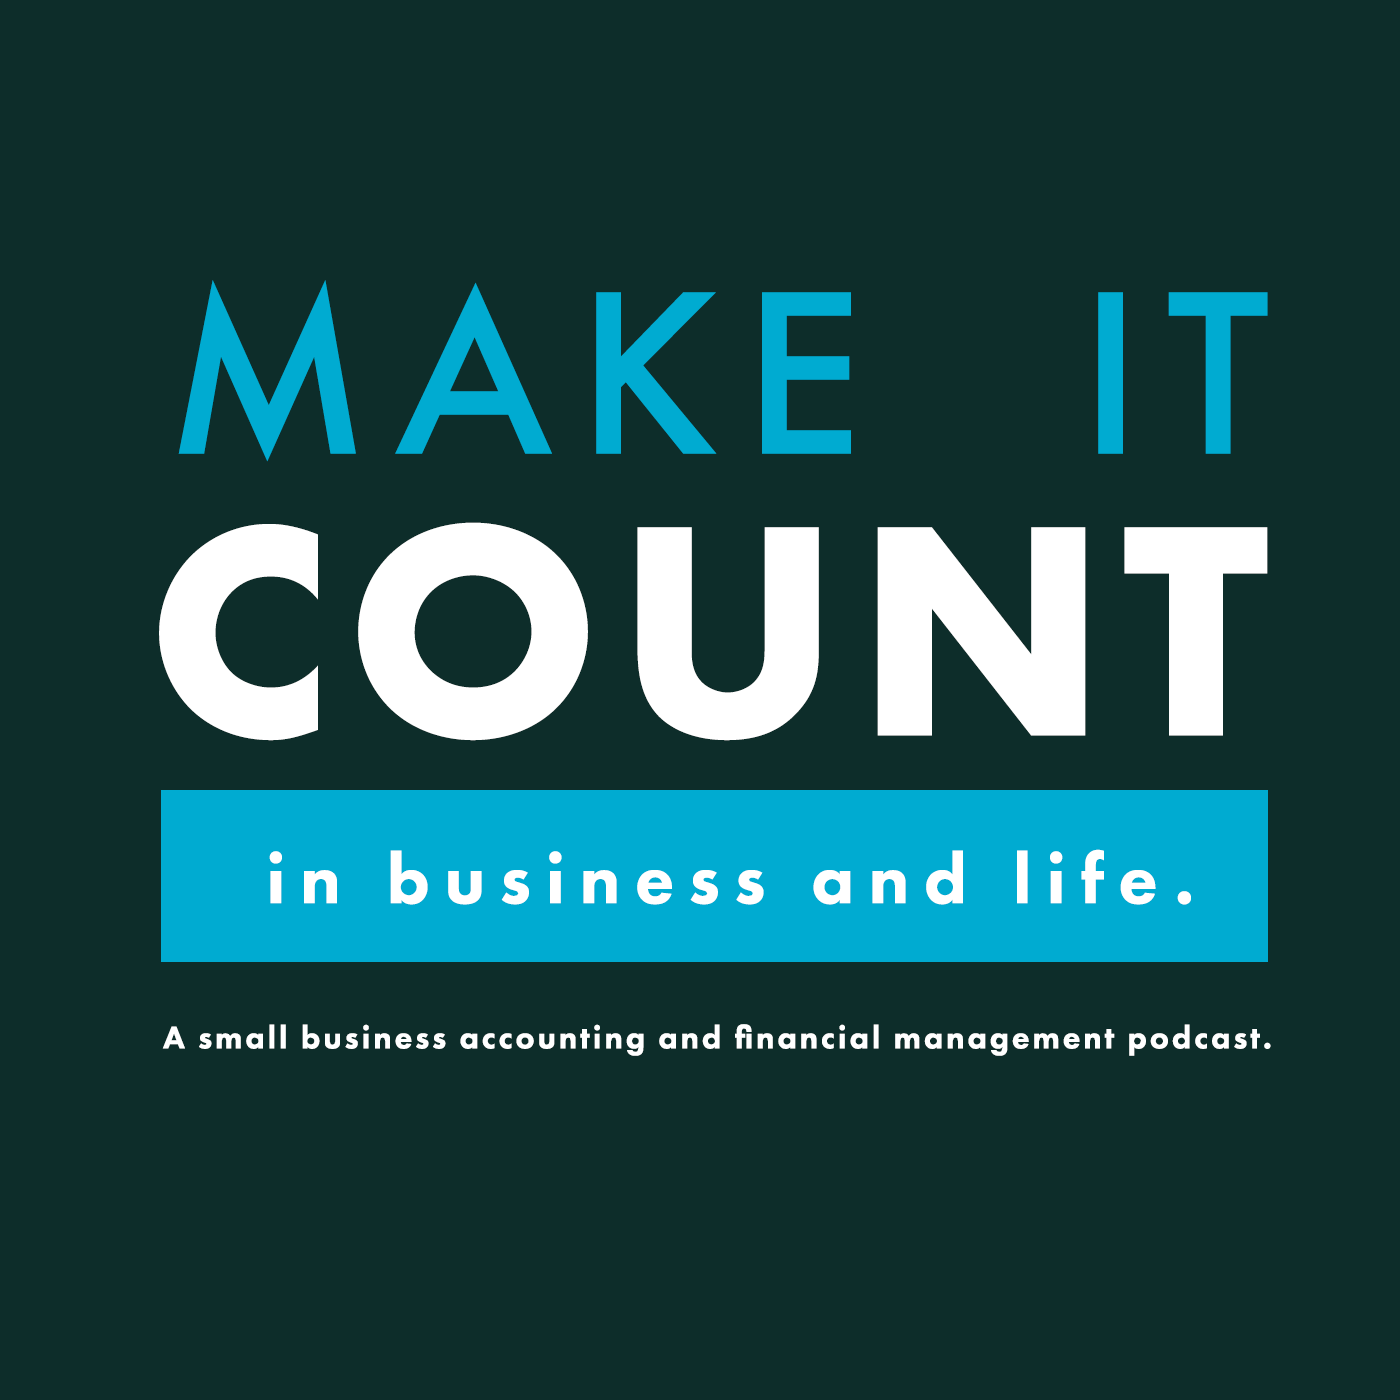 Podcast logo:  Make it count in business and life